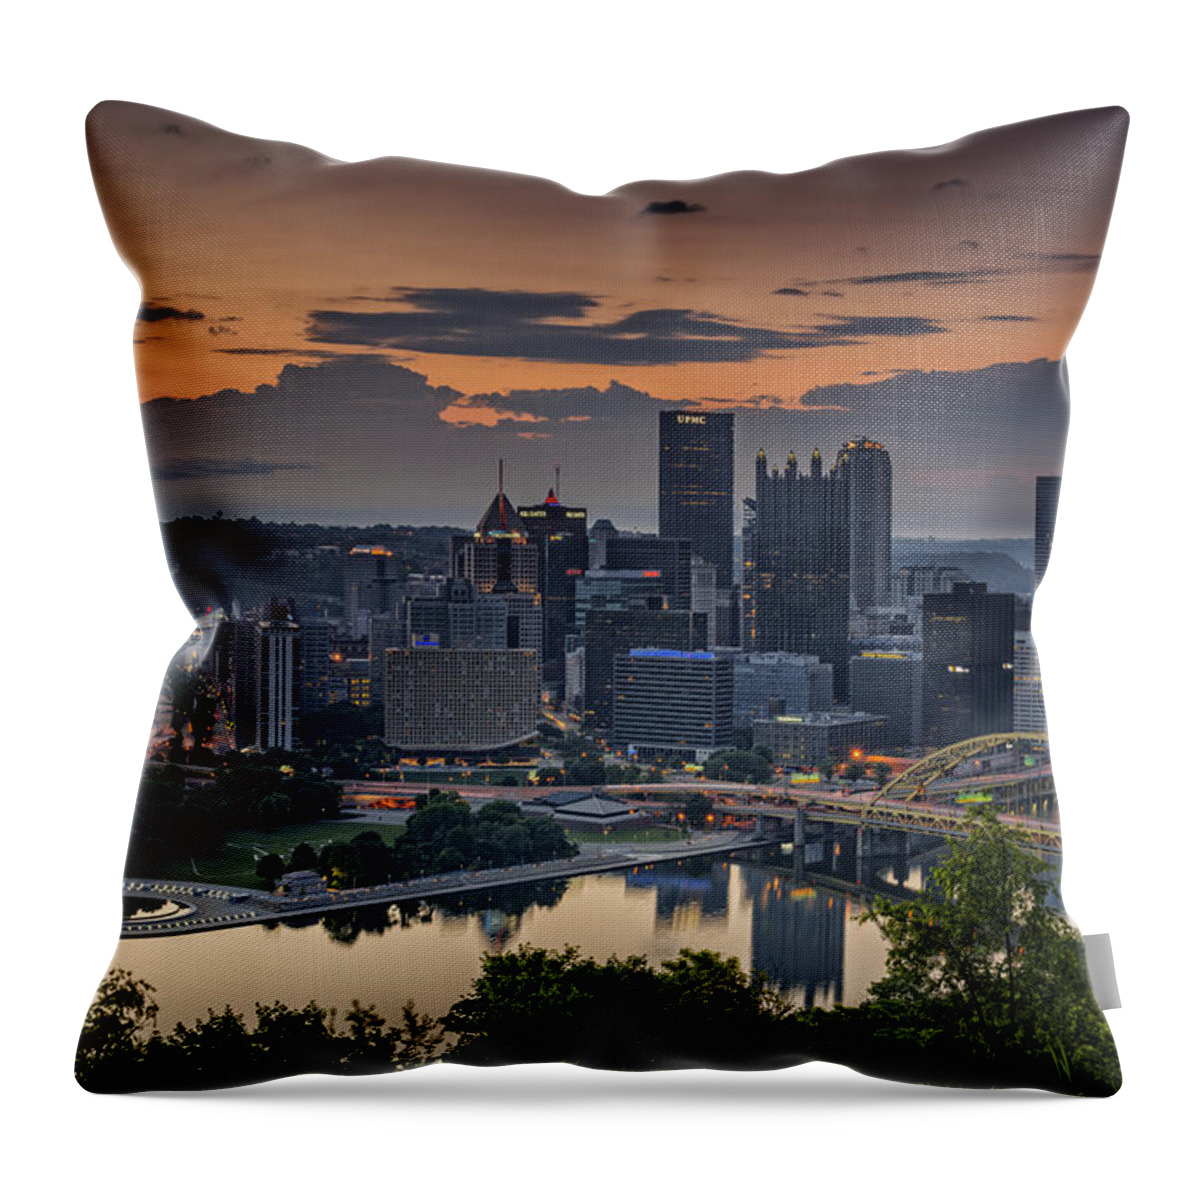 Pittsburgh Throw Pillow featuring the photograph Three Rivers Sunrise by Rick Berk